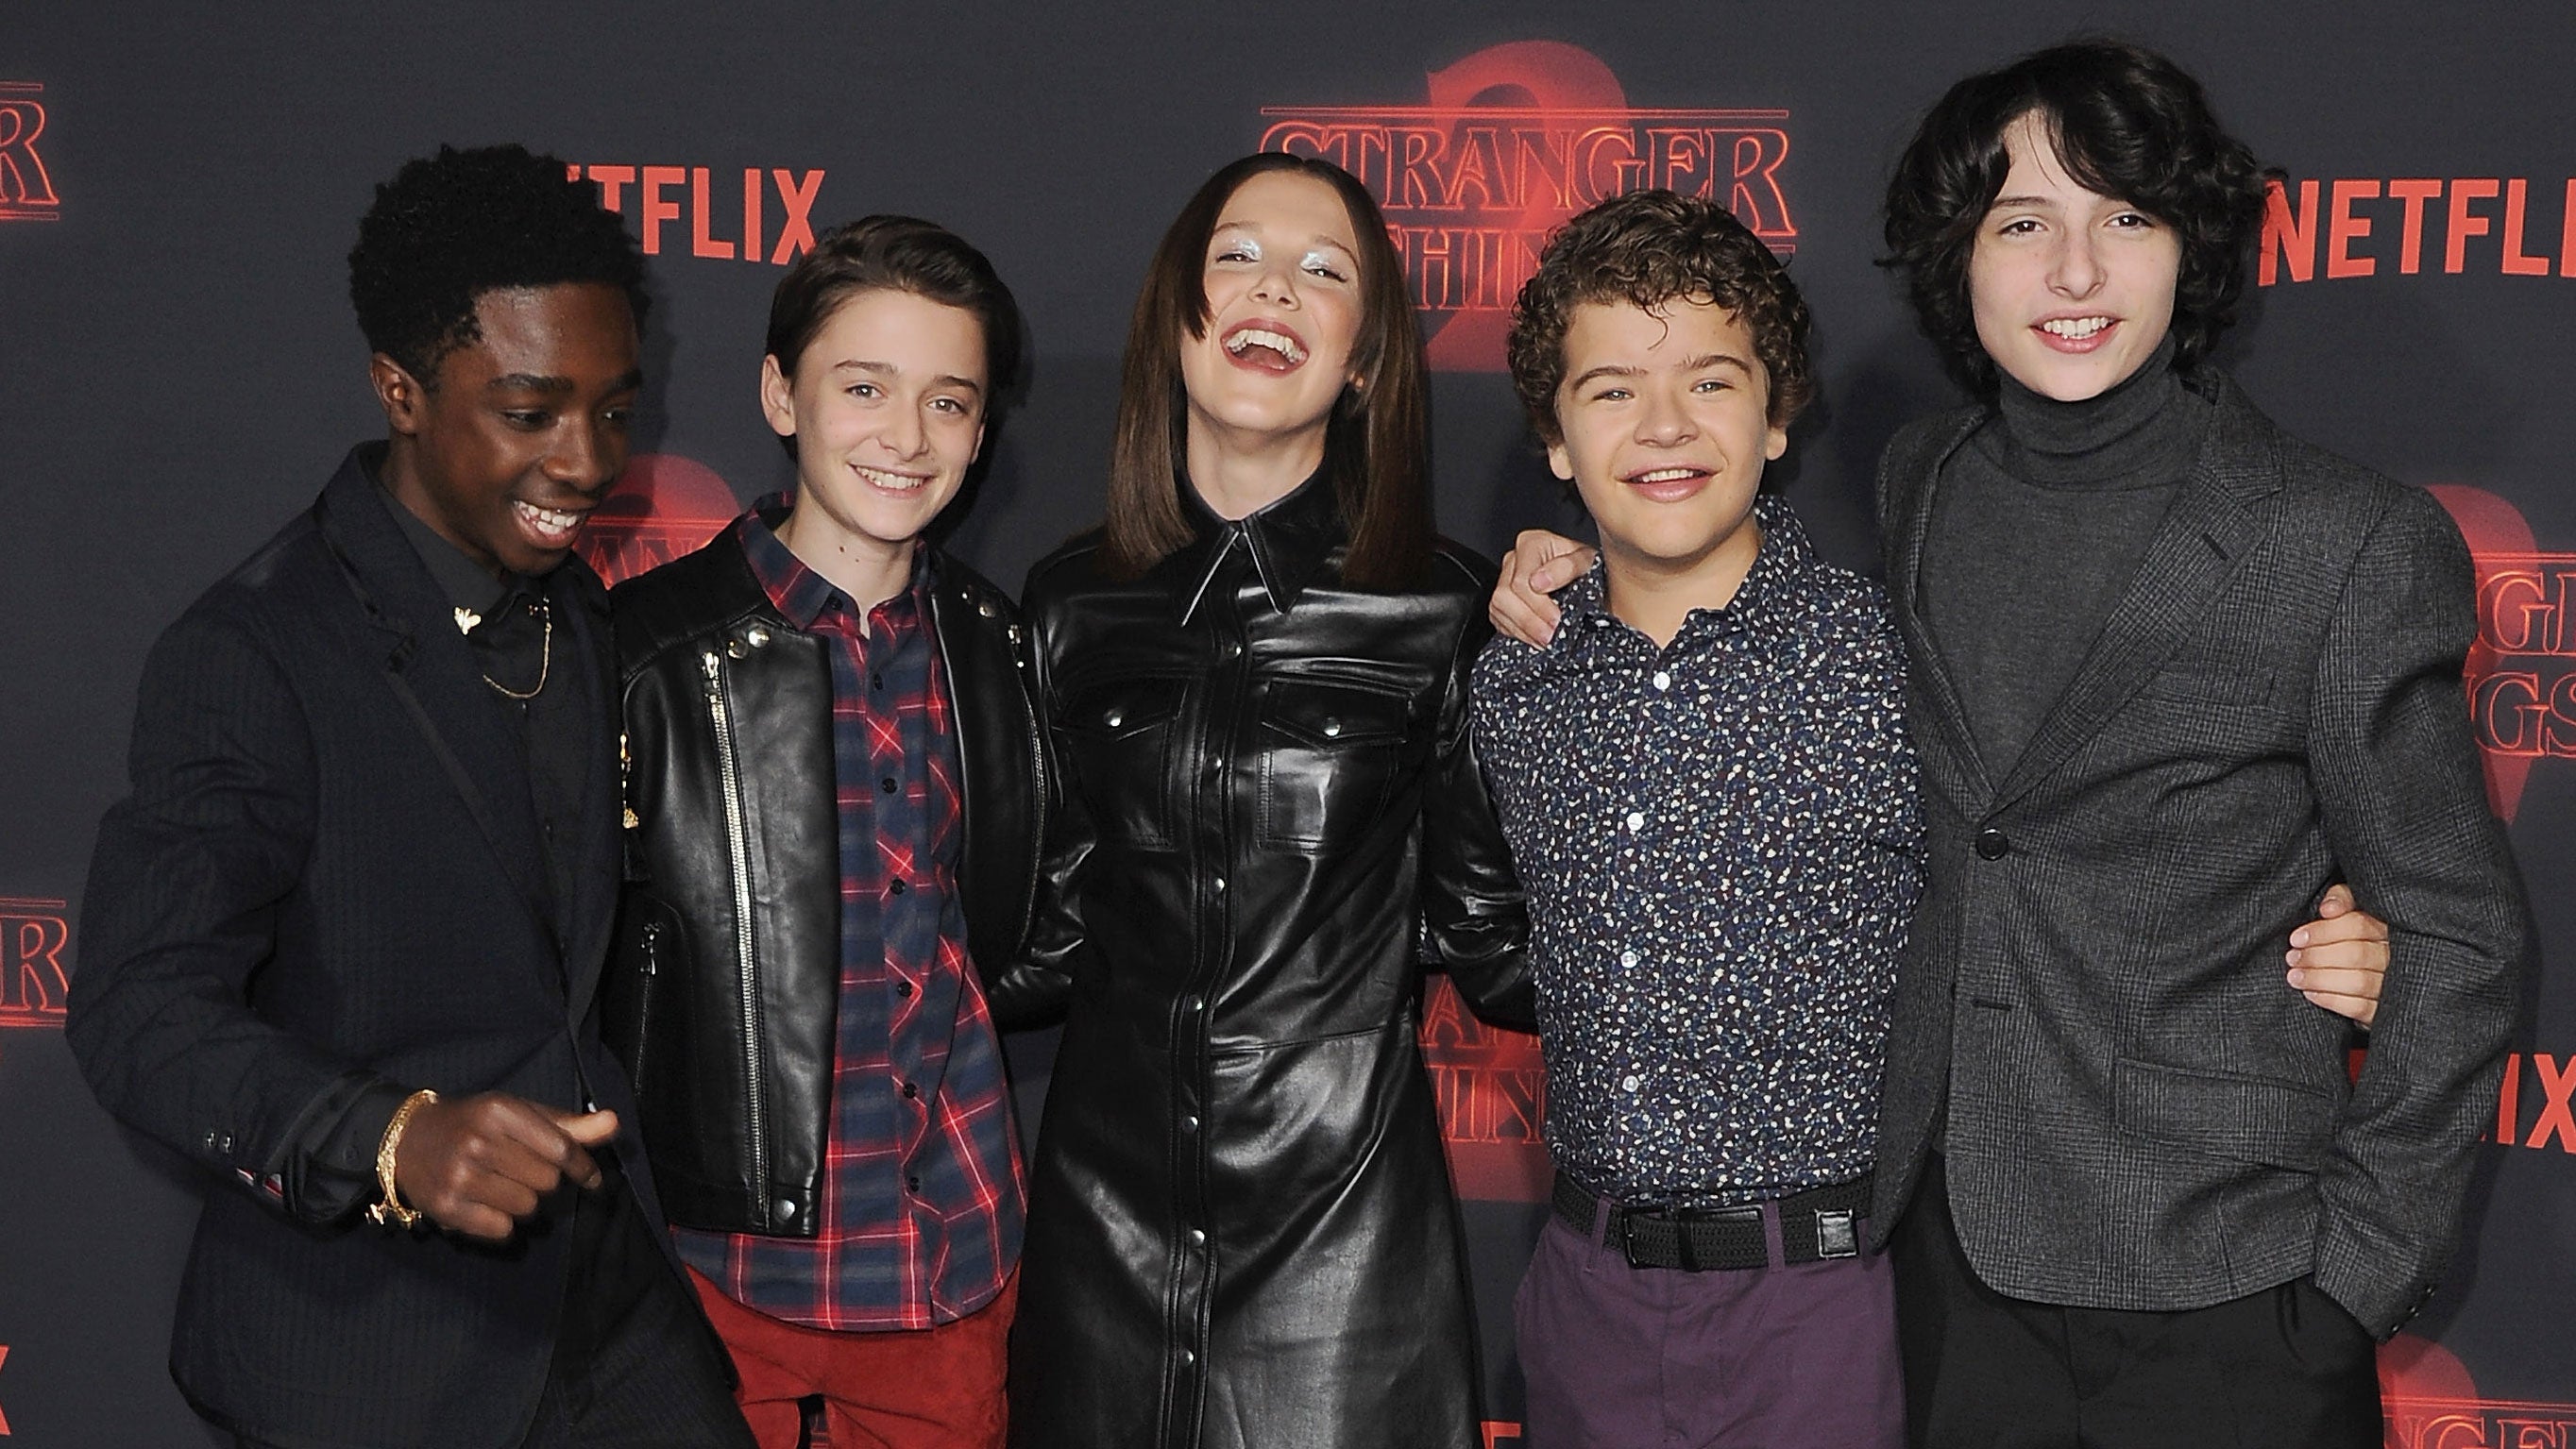 Stranger Things: Noah Schnapp on the Character He Lobbied the Show